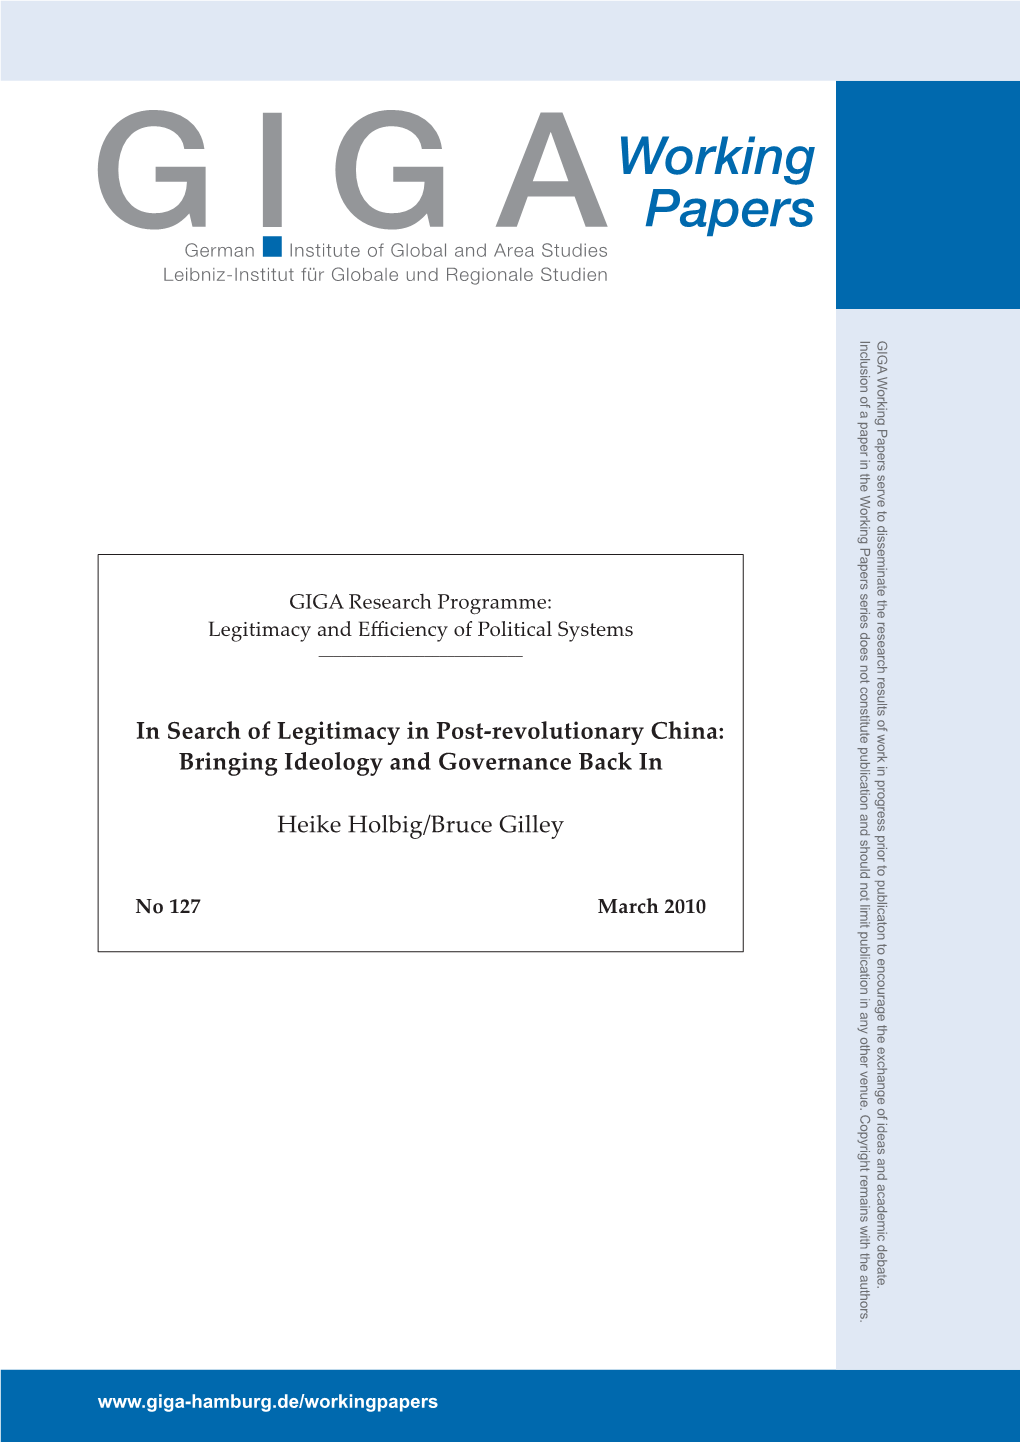 In Search of Legitimacy in Post-Revolutionary China: Bringing Ideology and Governance Back In